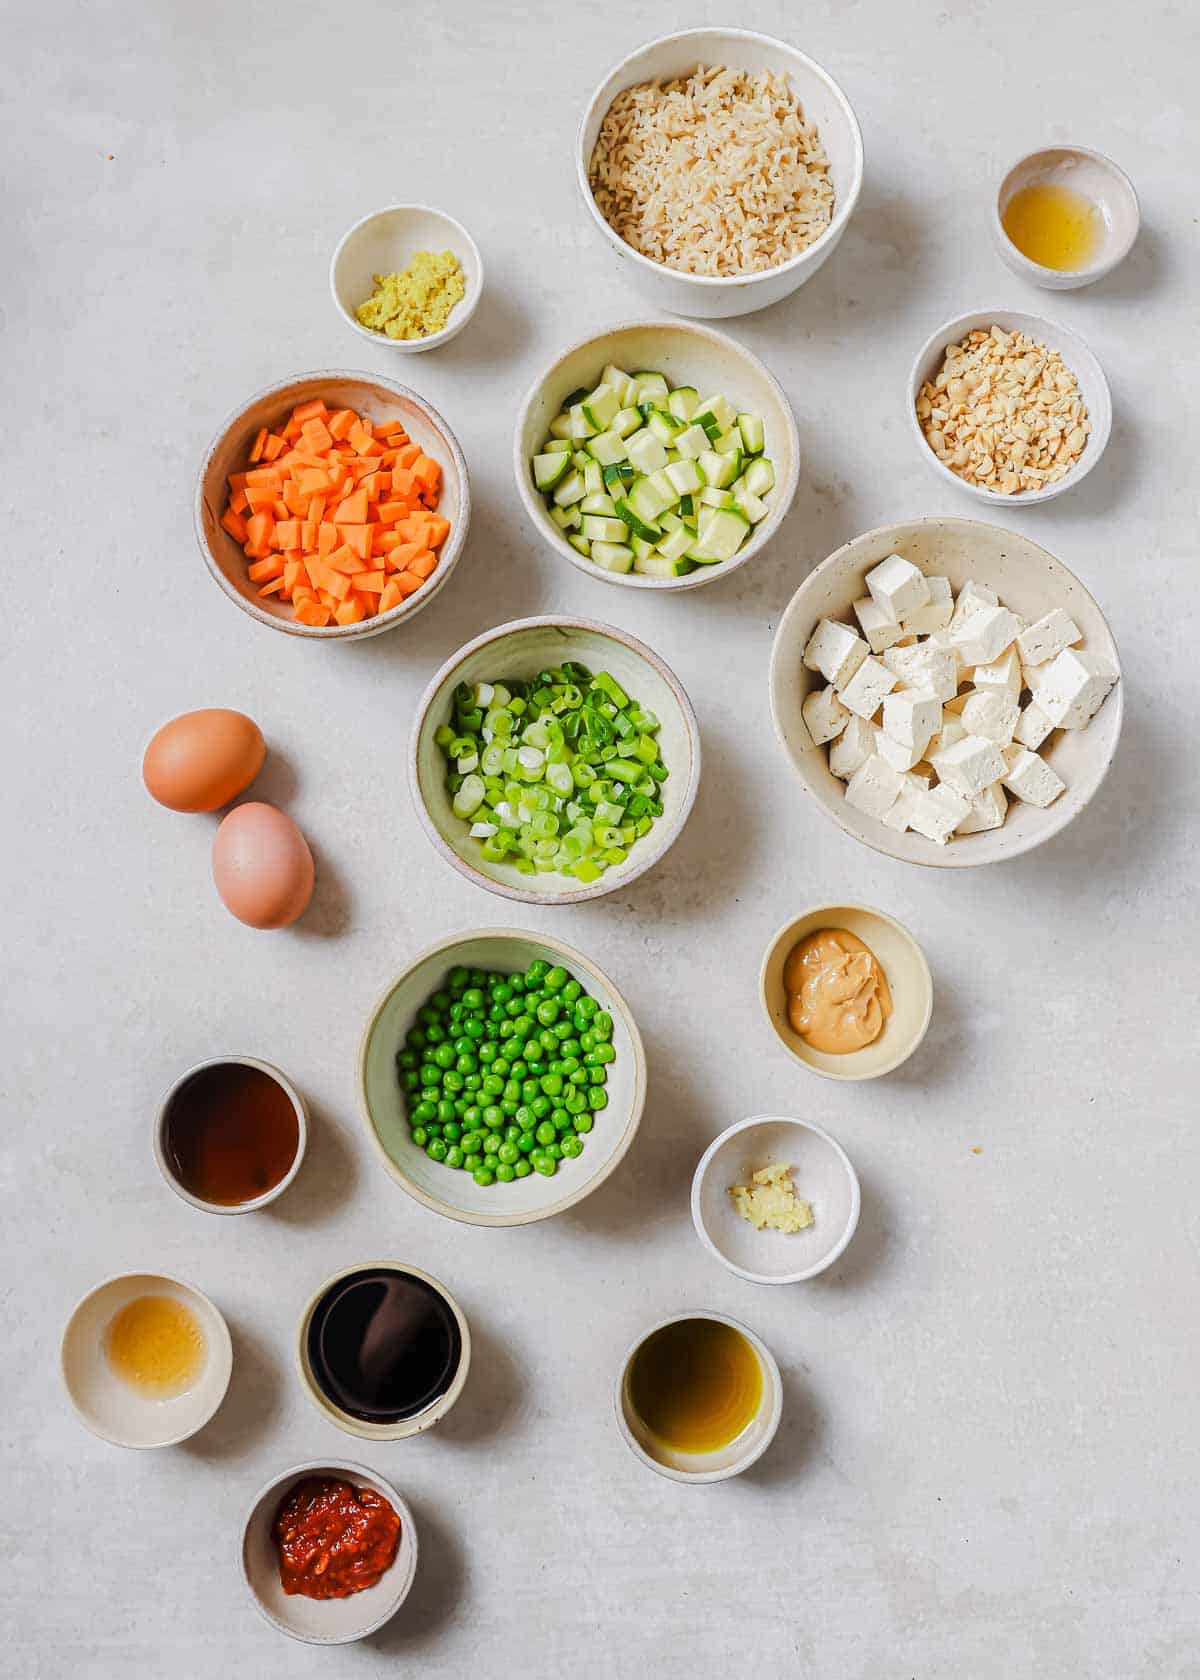 Ingredients in small bowls to make tofu fried rice on a white surface.